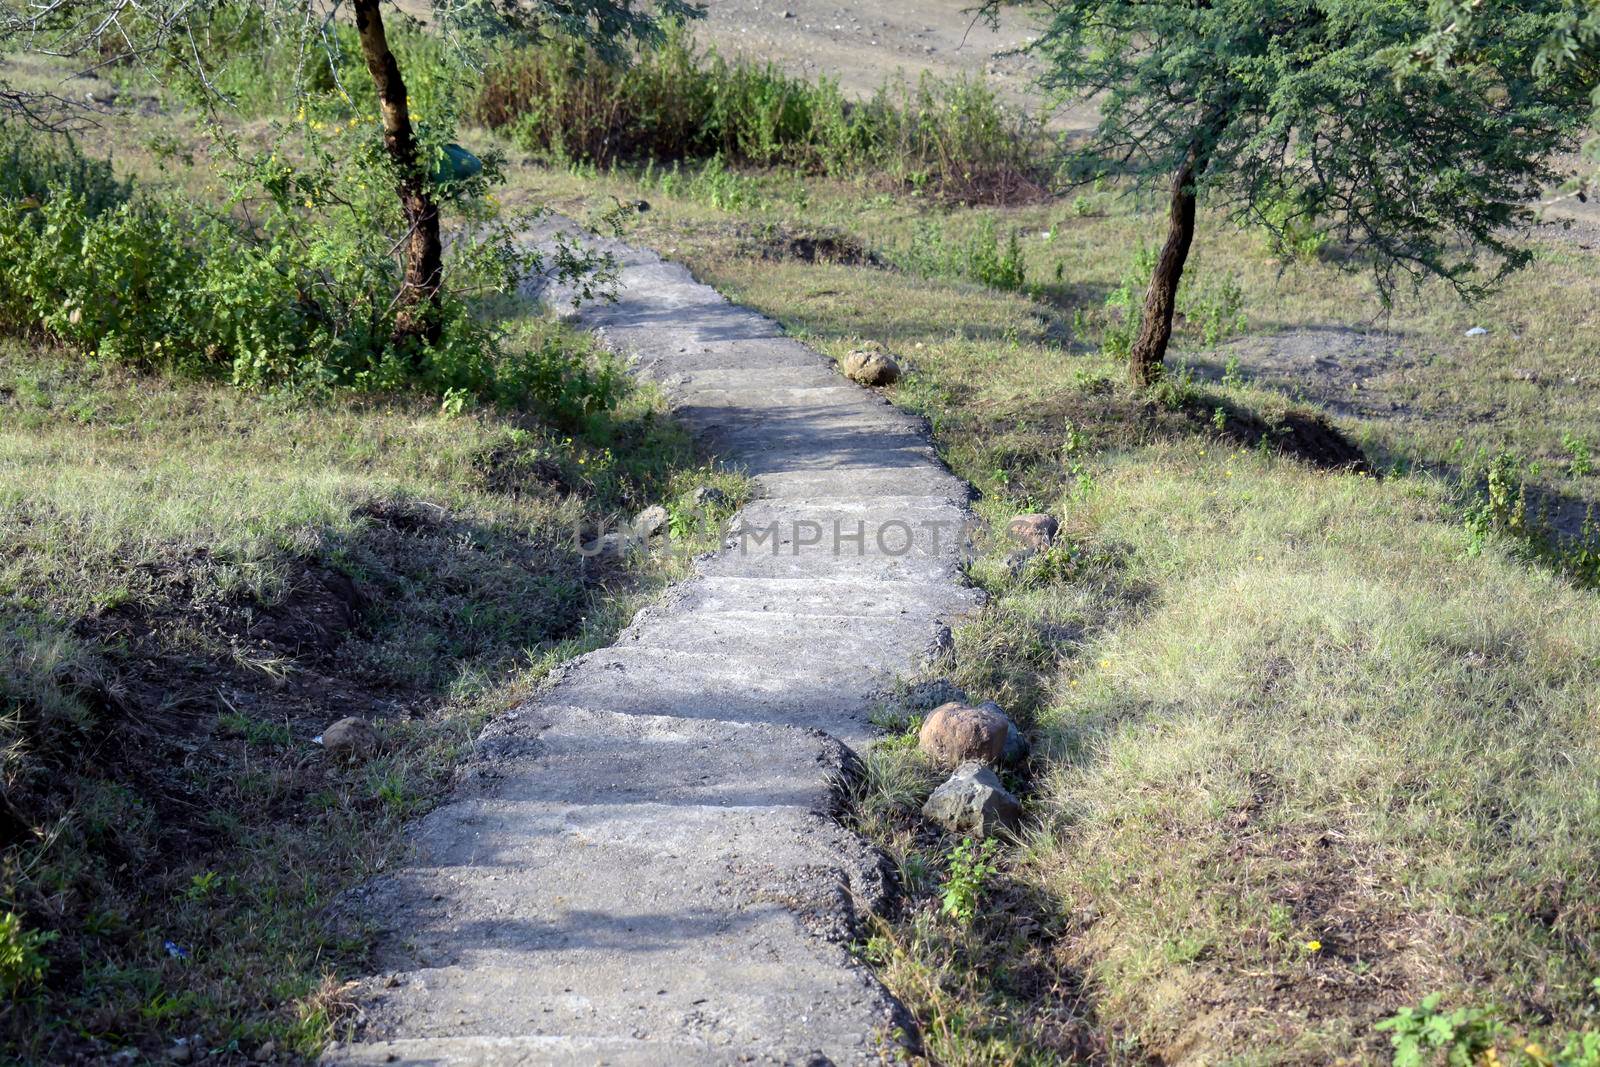 A view of a narrow stairway on a hill in a rural area, Long and narrow stone stairway on the rocky hill